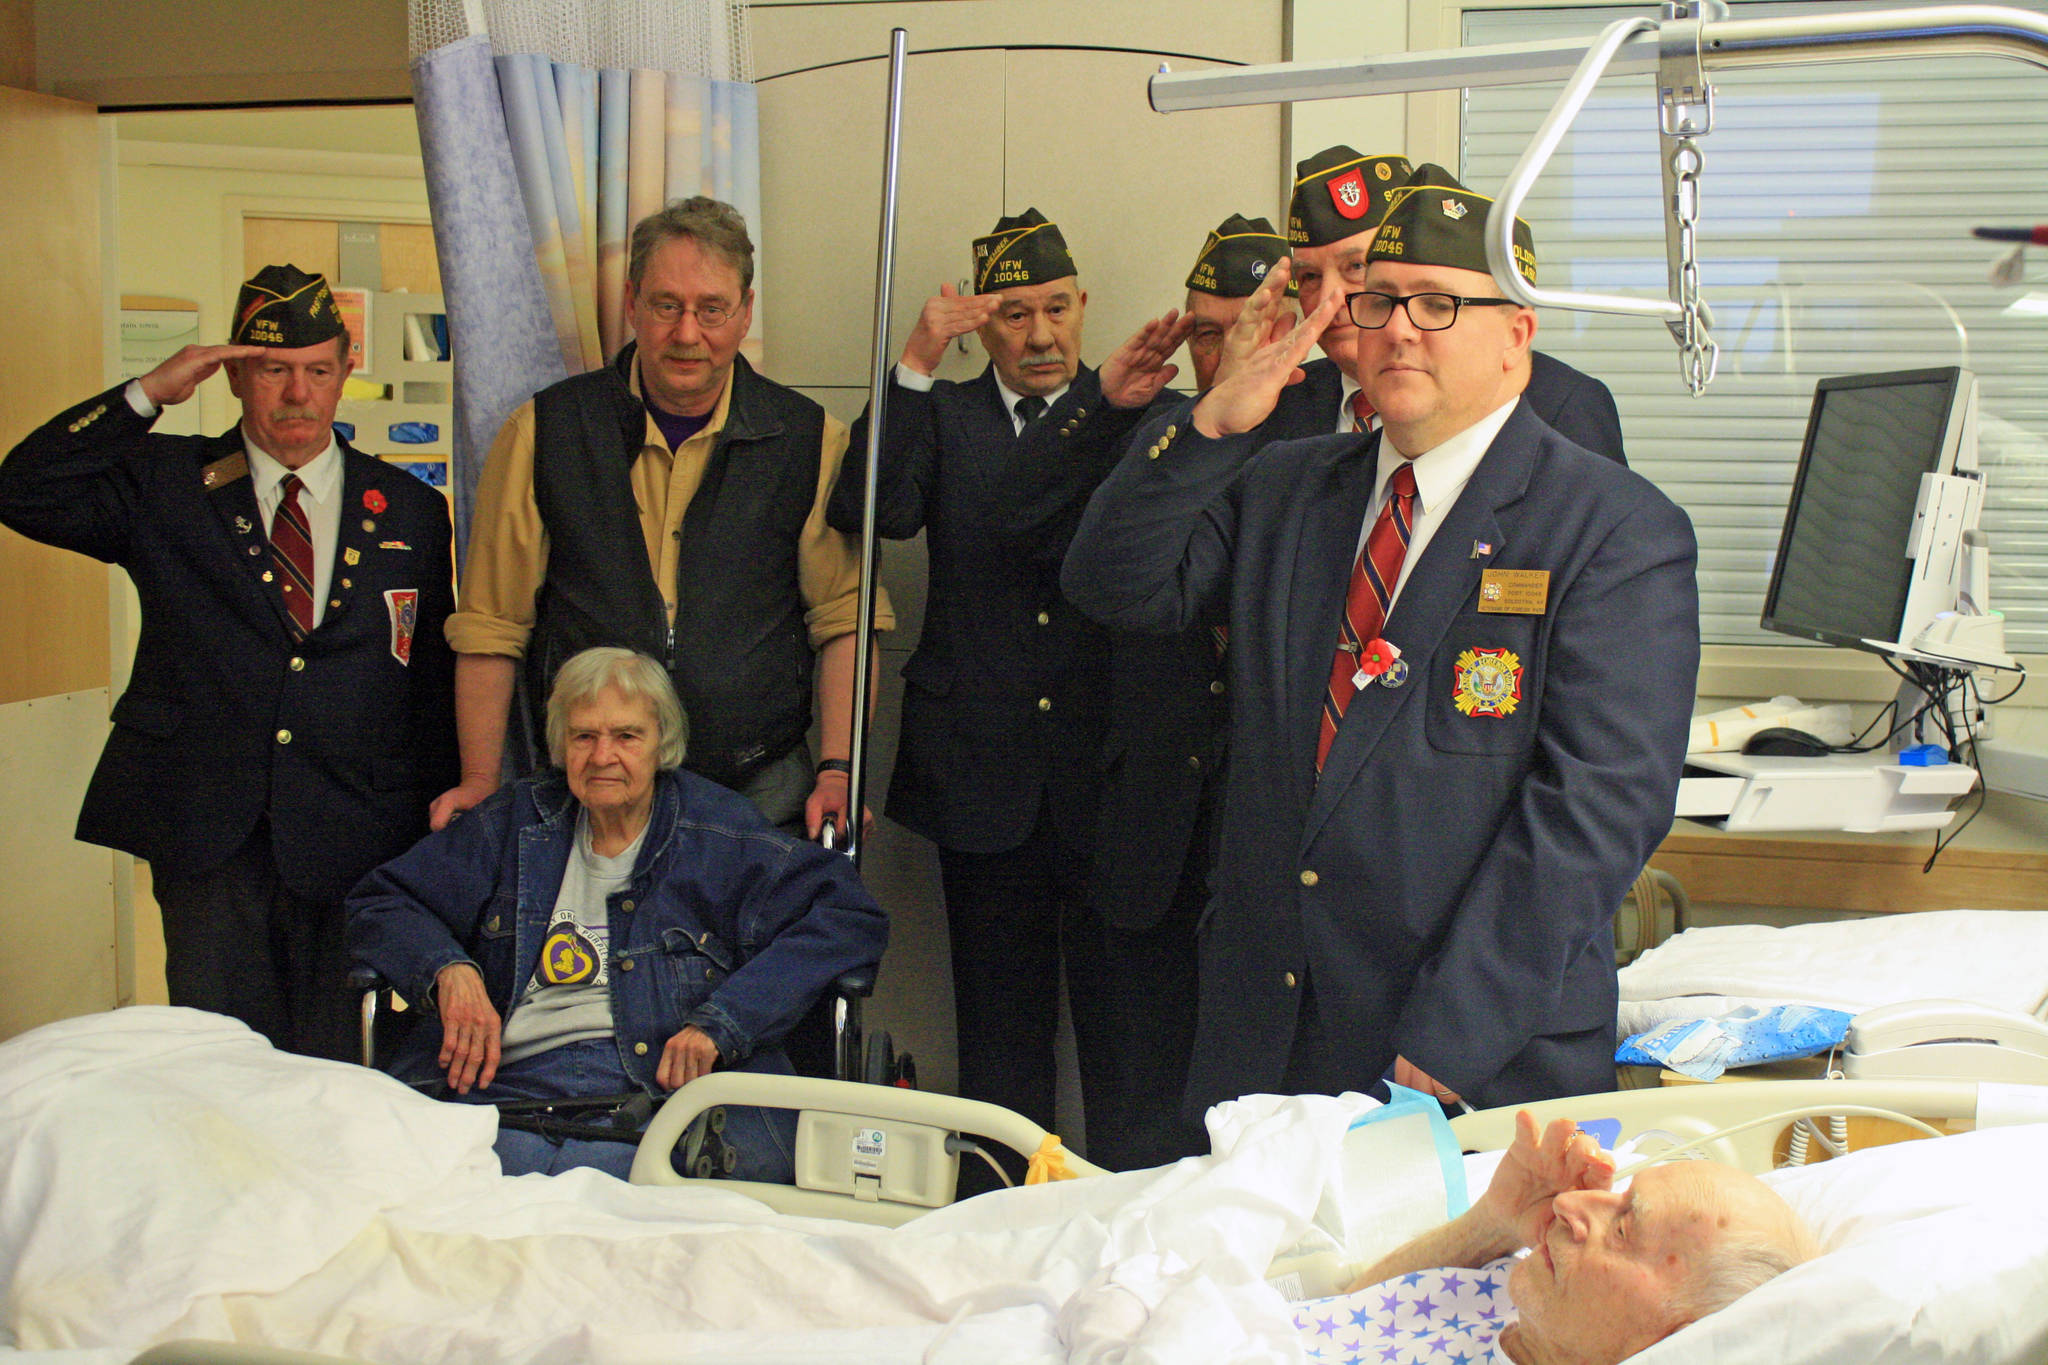 Members of the Soldotna Veterans of Foreign Wars post honor World War II veteran Bill Field for 70 years of service in the VFW at the Central Peninsula Hospital on Monday. (Photo by Erin Thompson/Peninsula Clarion) Members of the Soldotna Veterans of Foreign Wars post honor World War II veteran Bill Field for 70 years of service in the VFW at the Central Peninsula Hospital on Feb. 5. (Photo by Erin Thompson/Peninsula Clarion)